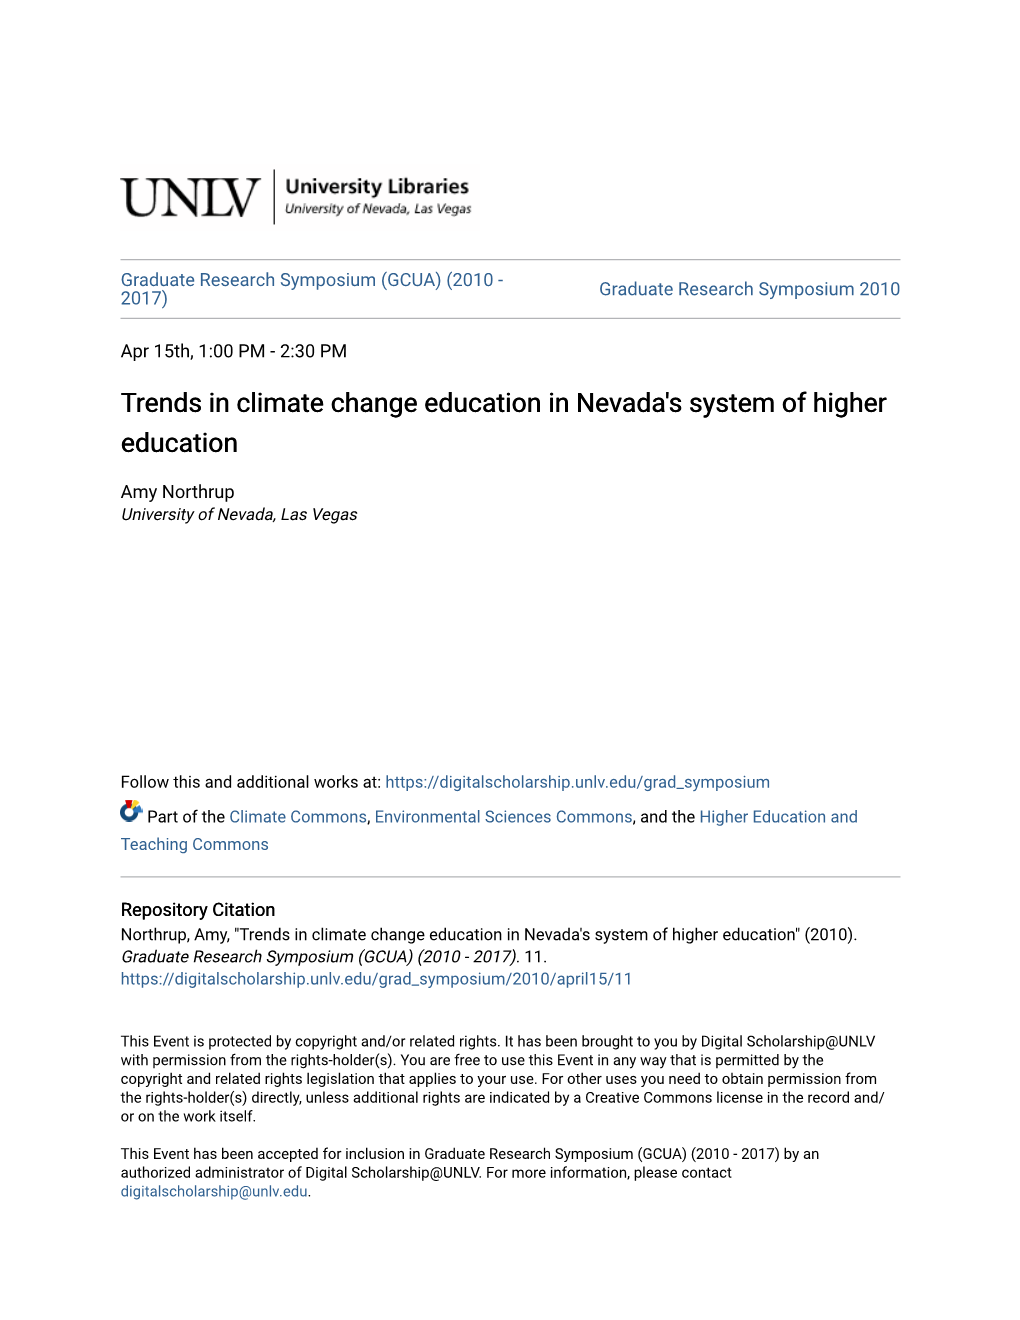 Trends in Climate Change Education in Nevada's System of Higher Education